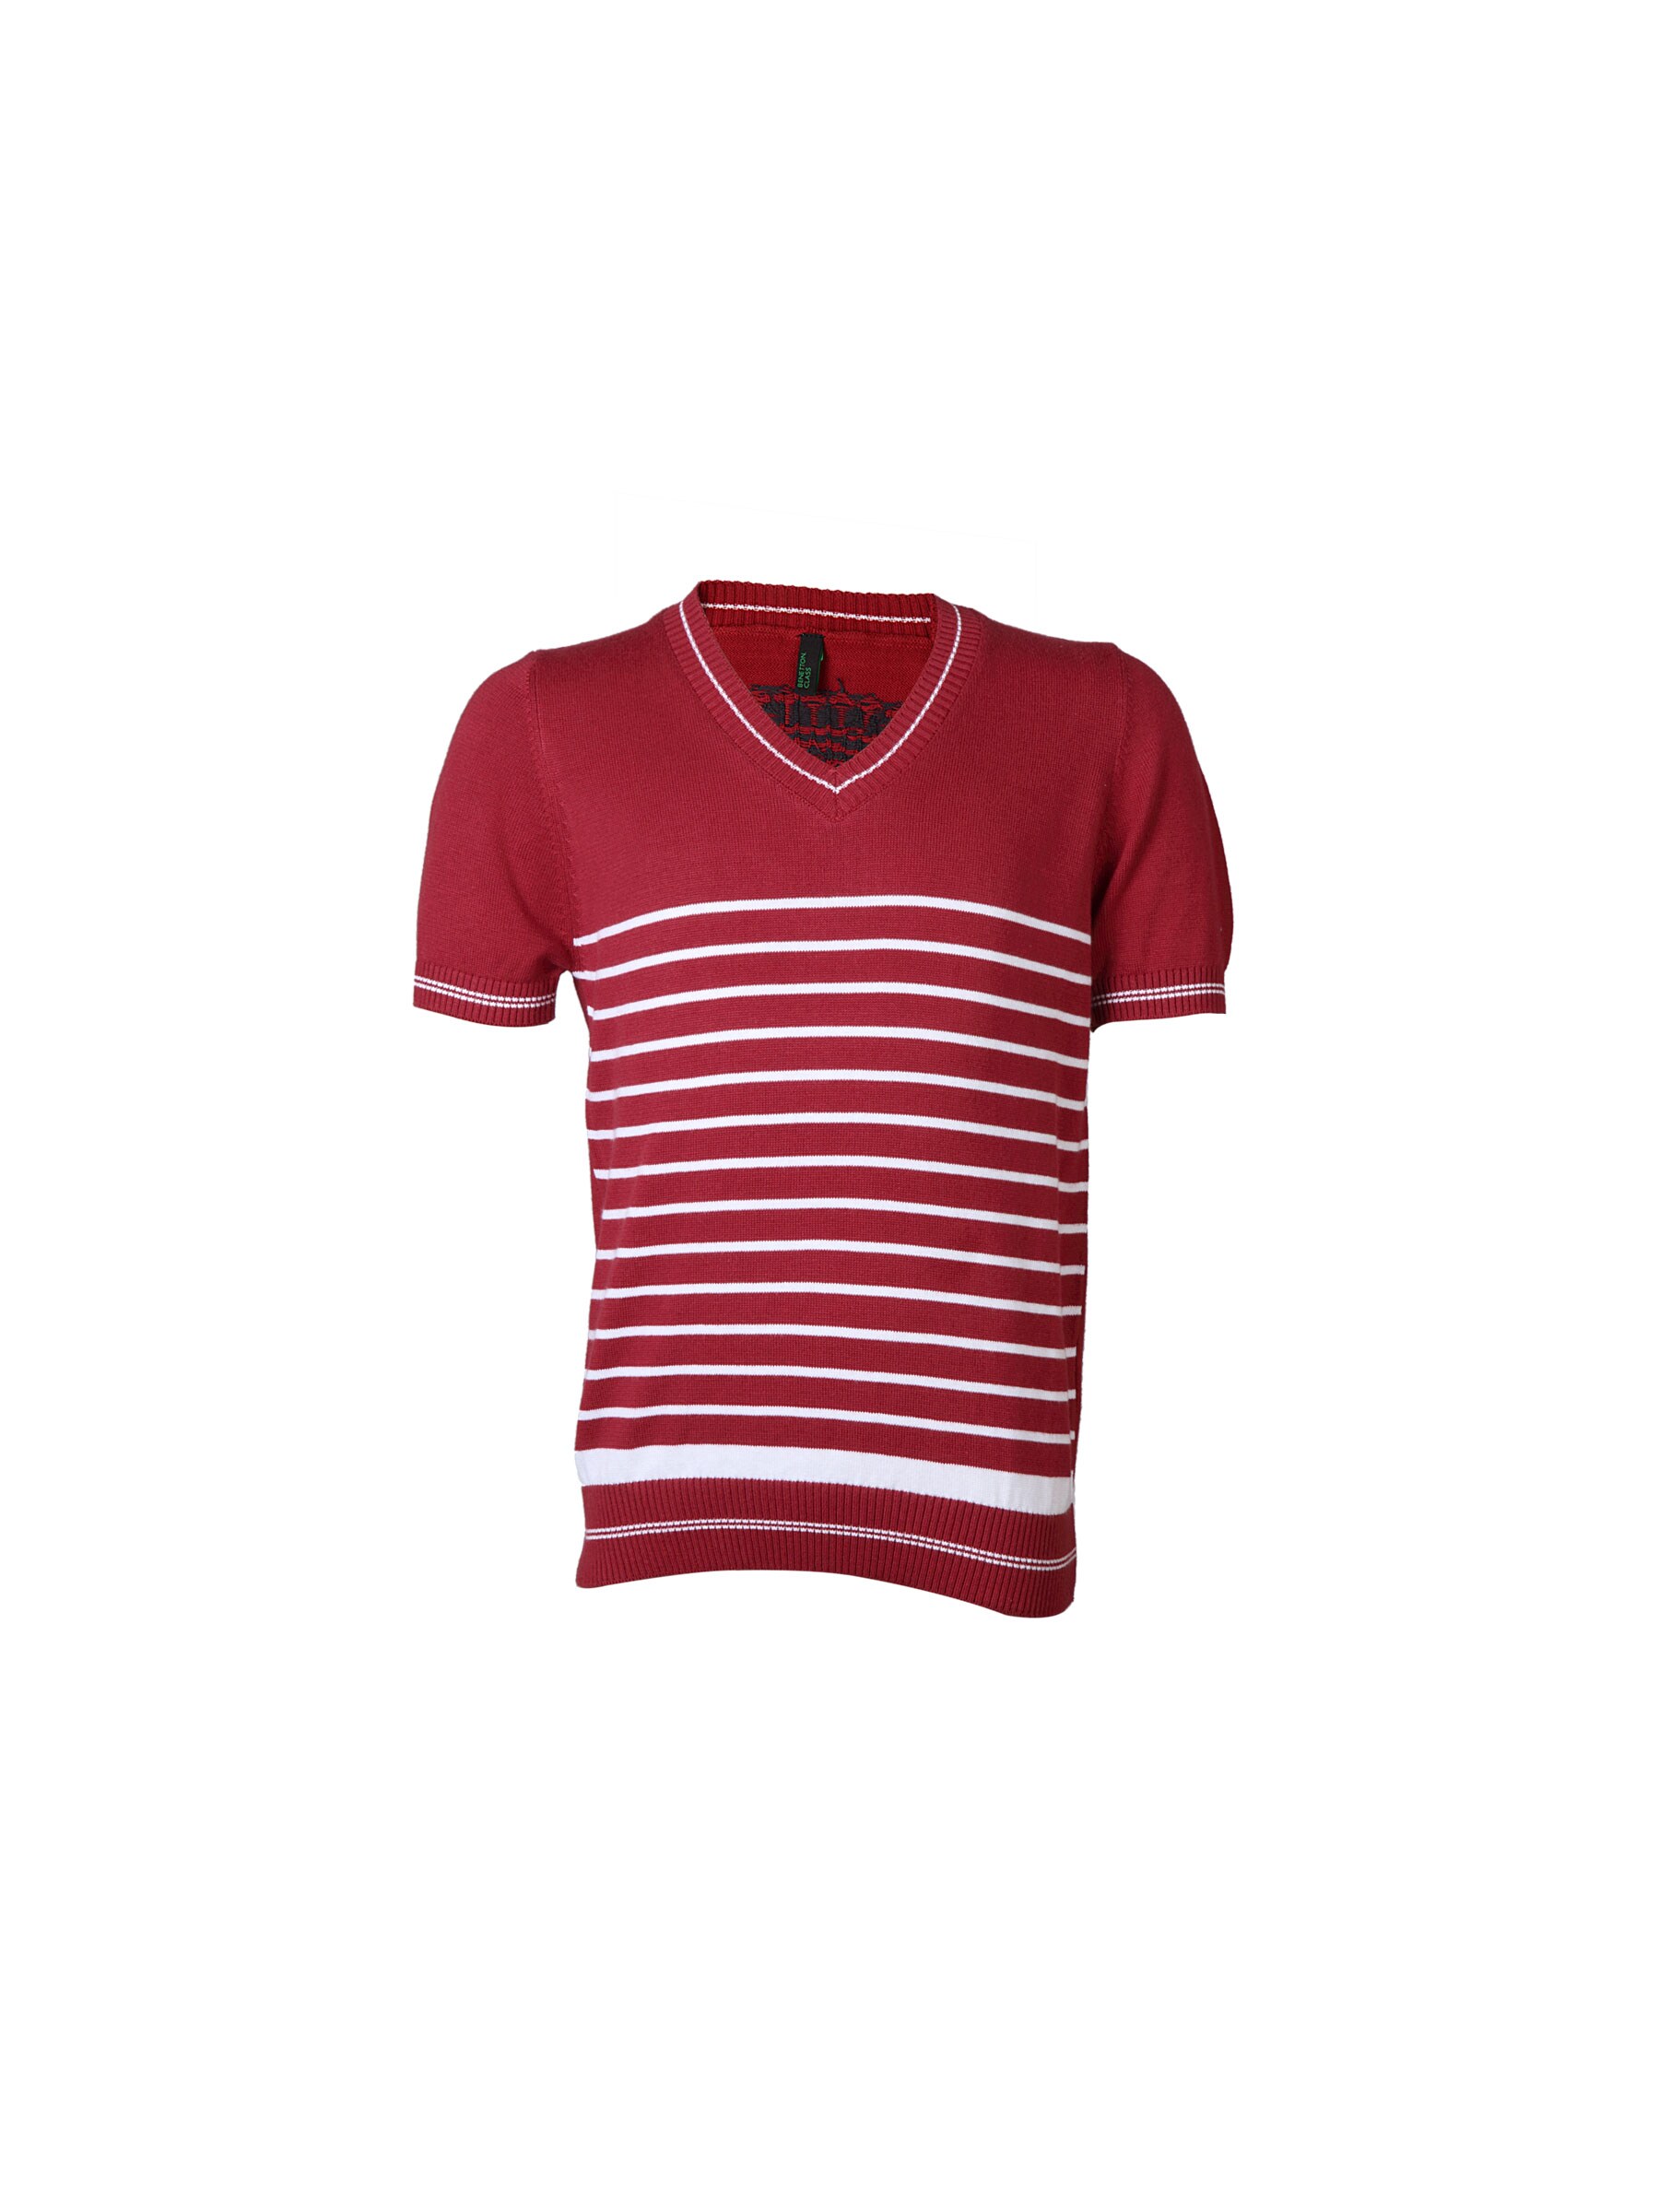 United Colors of Benetton Kids Boys Maroon Striped T-shirt